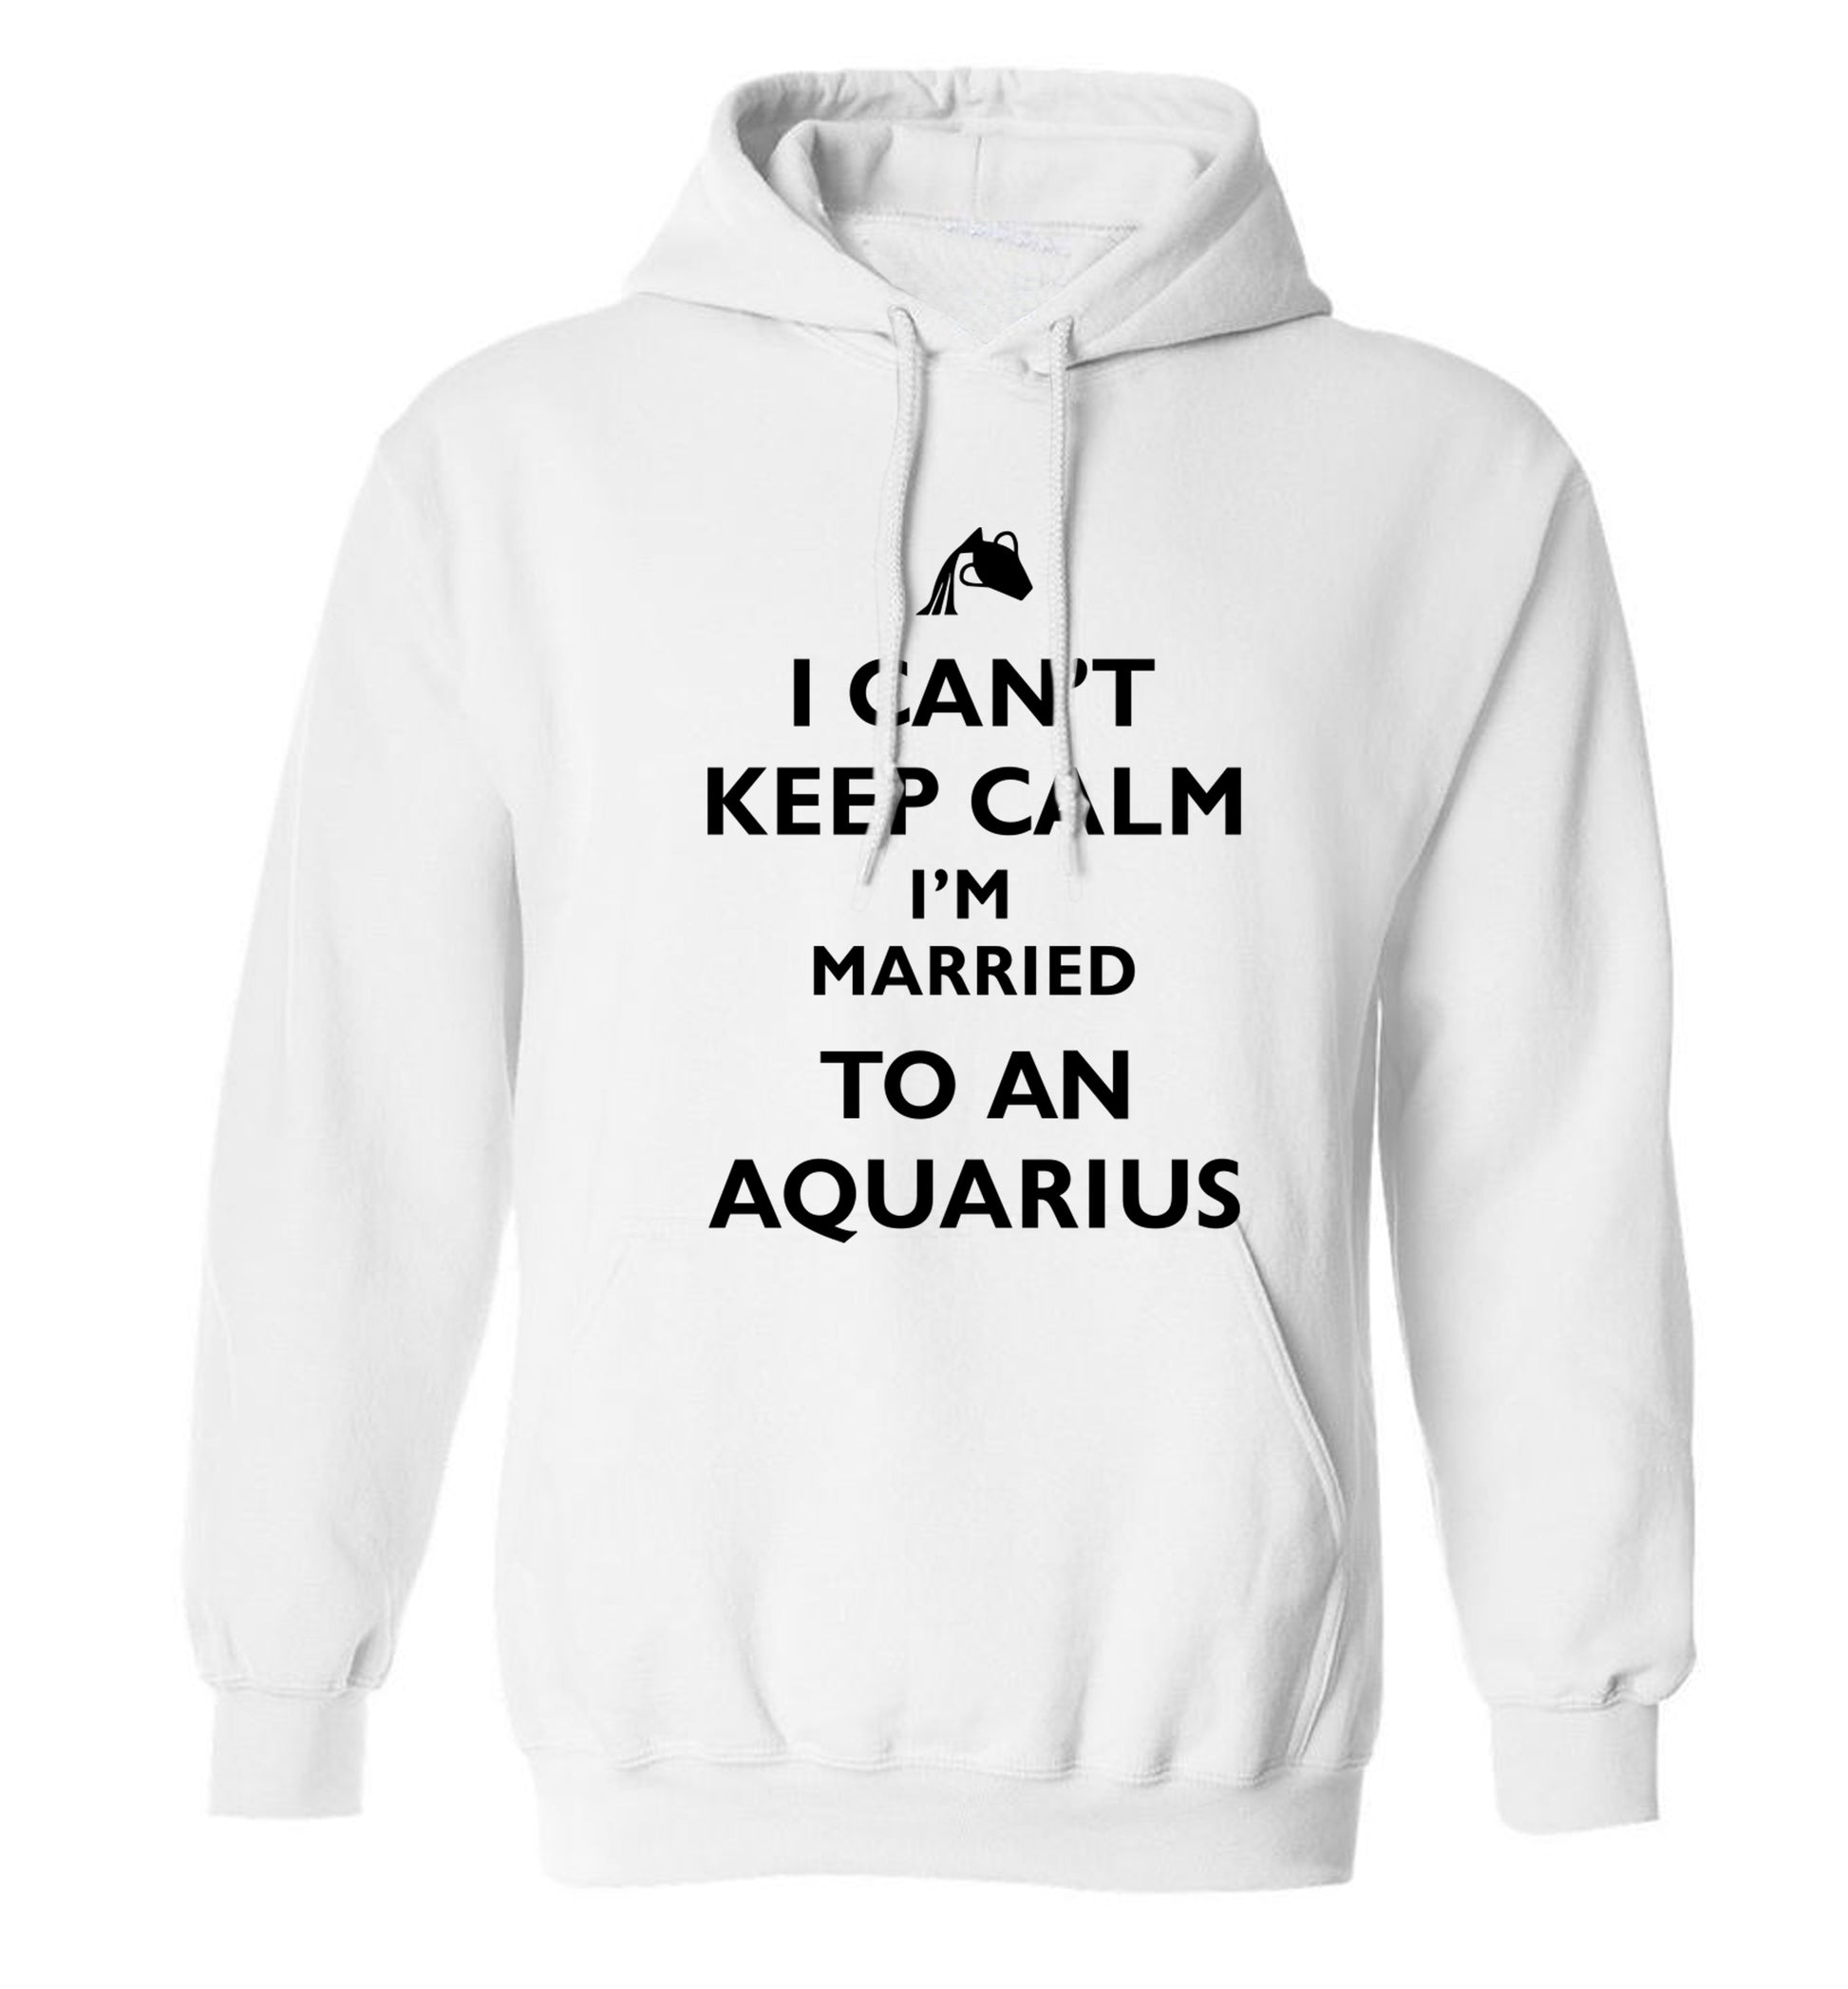 I can't keep calm I'm married to an aquarius adults unisex white hoodie 2XL